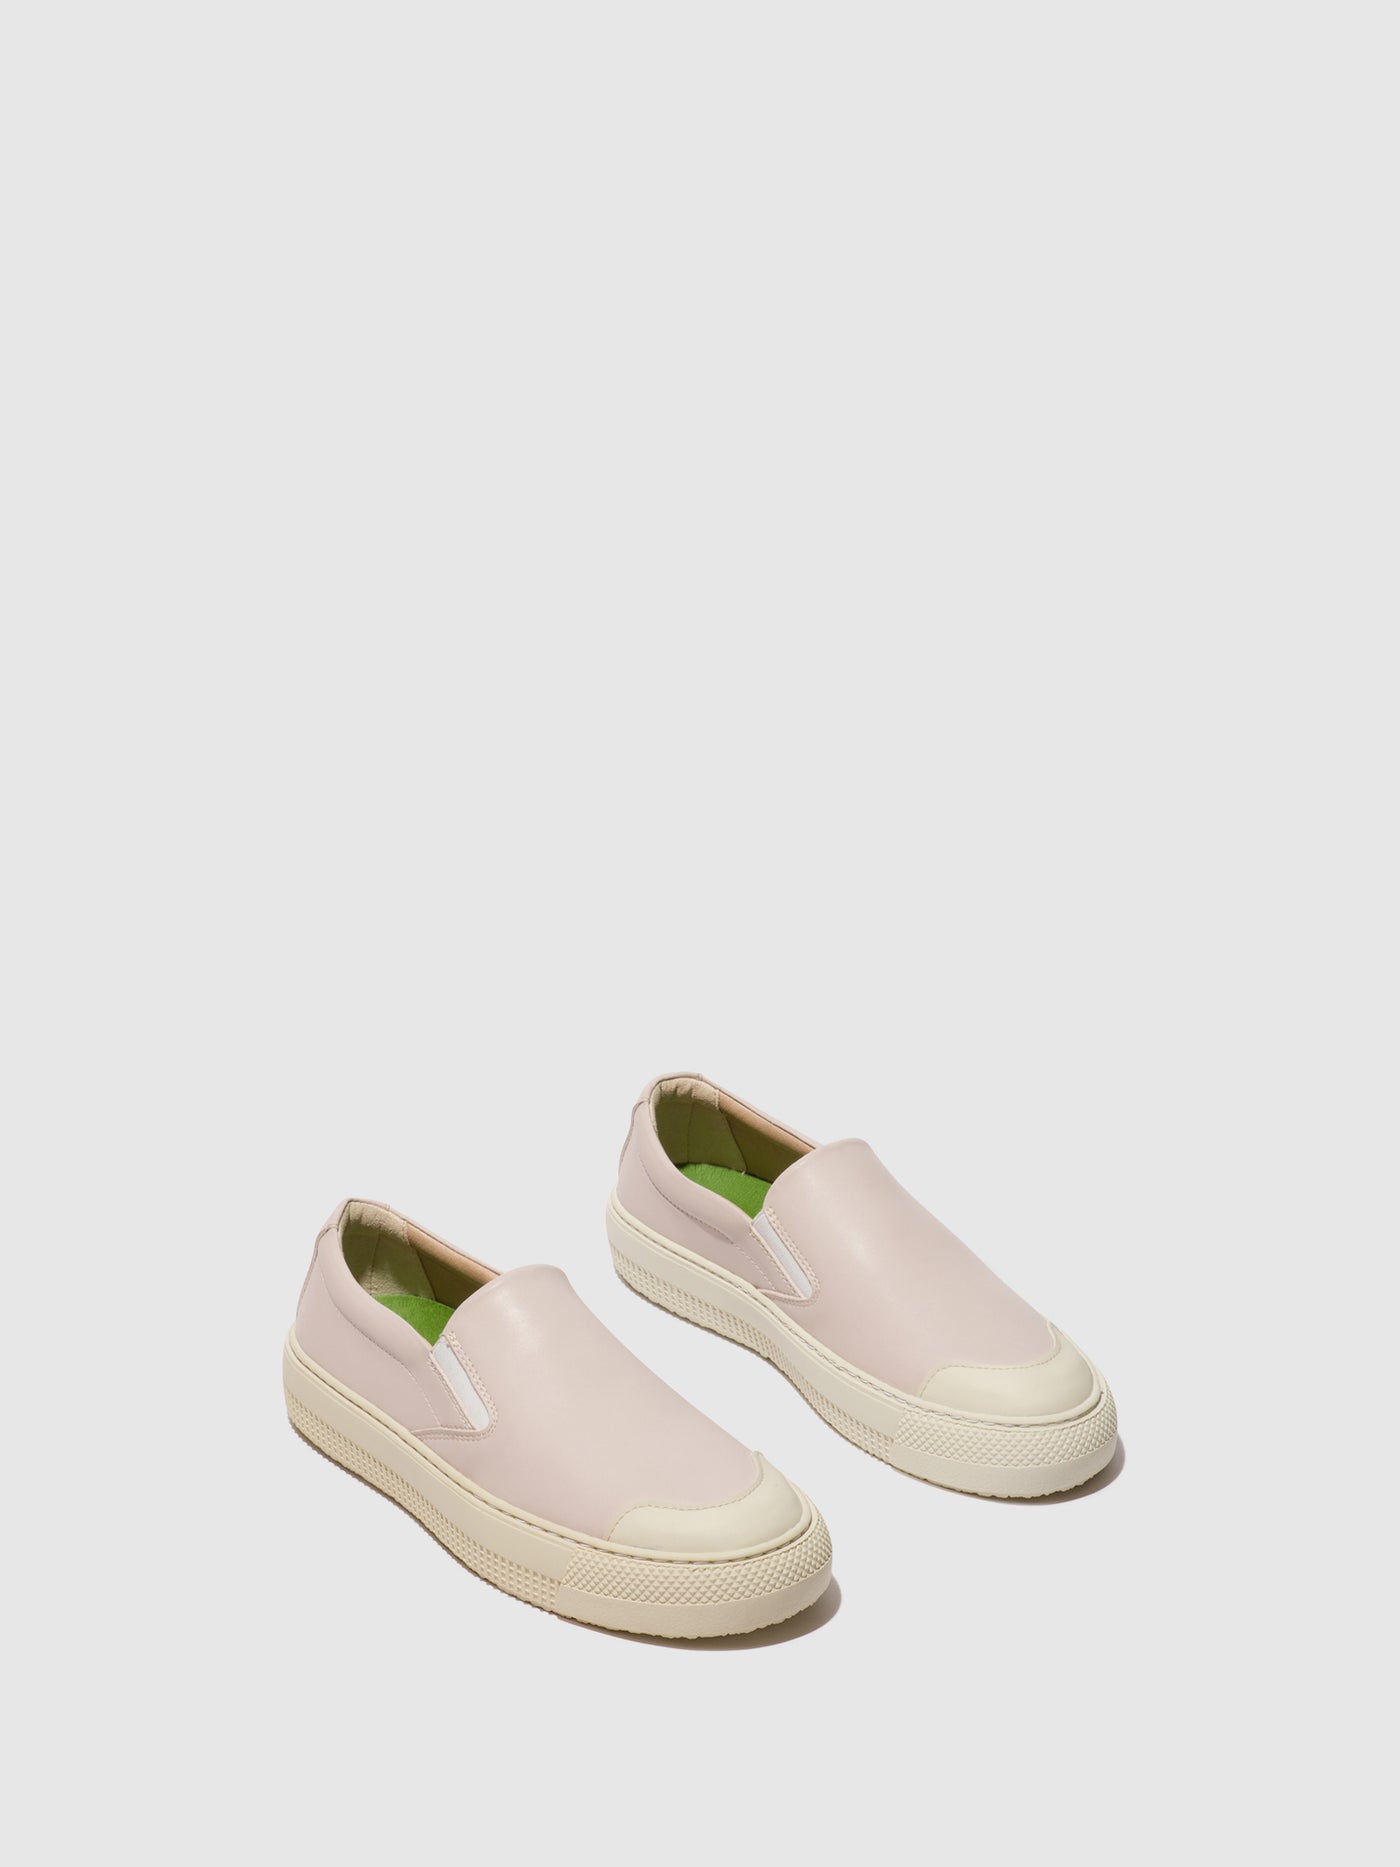 Slip-on Trainers TOAF584FLY PINK